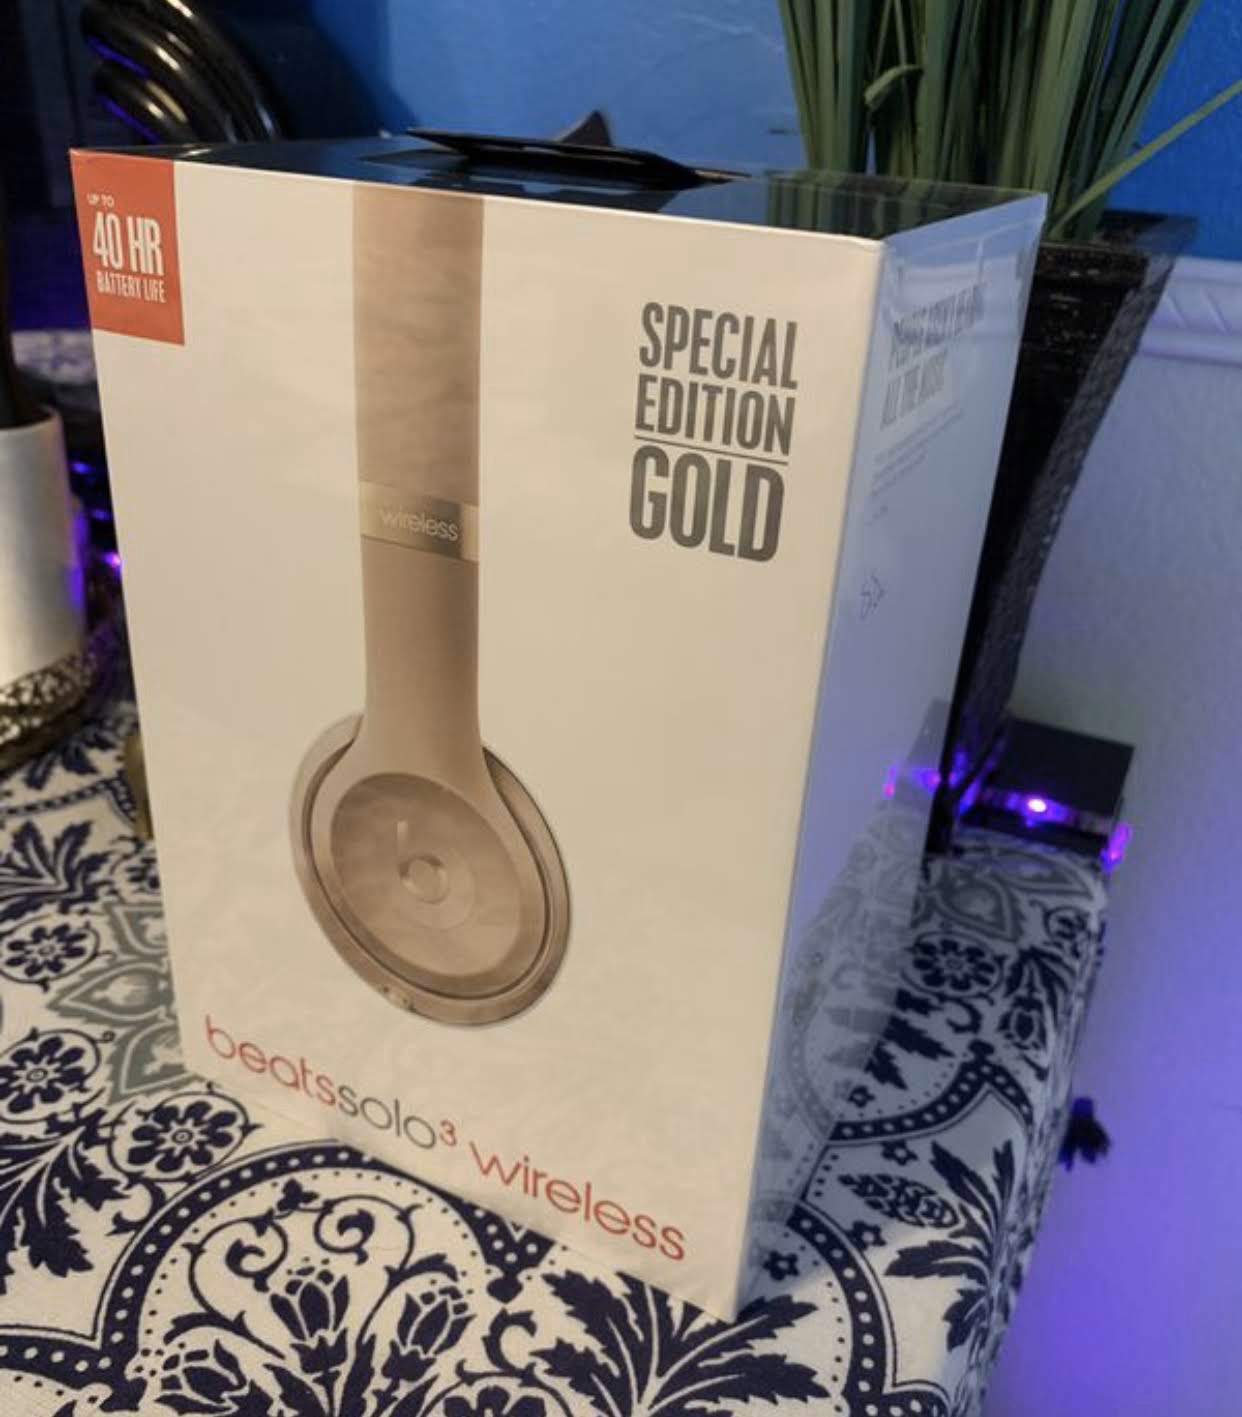 Beats Solo 3 Wireless Metallic Gold Limited Edition! Sealed!